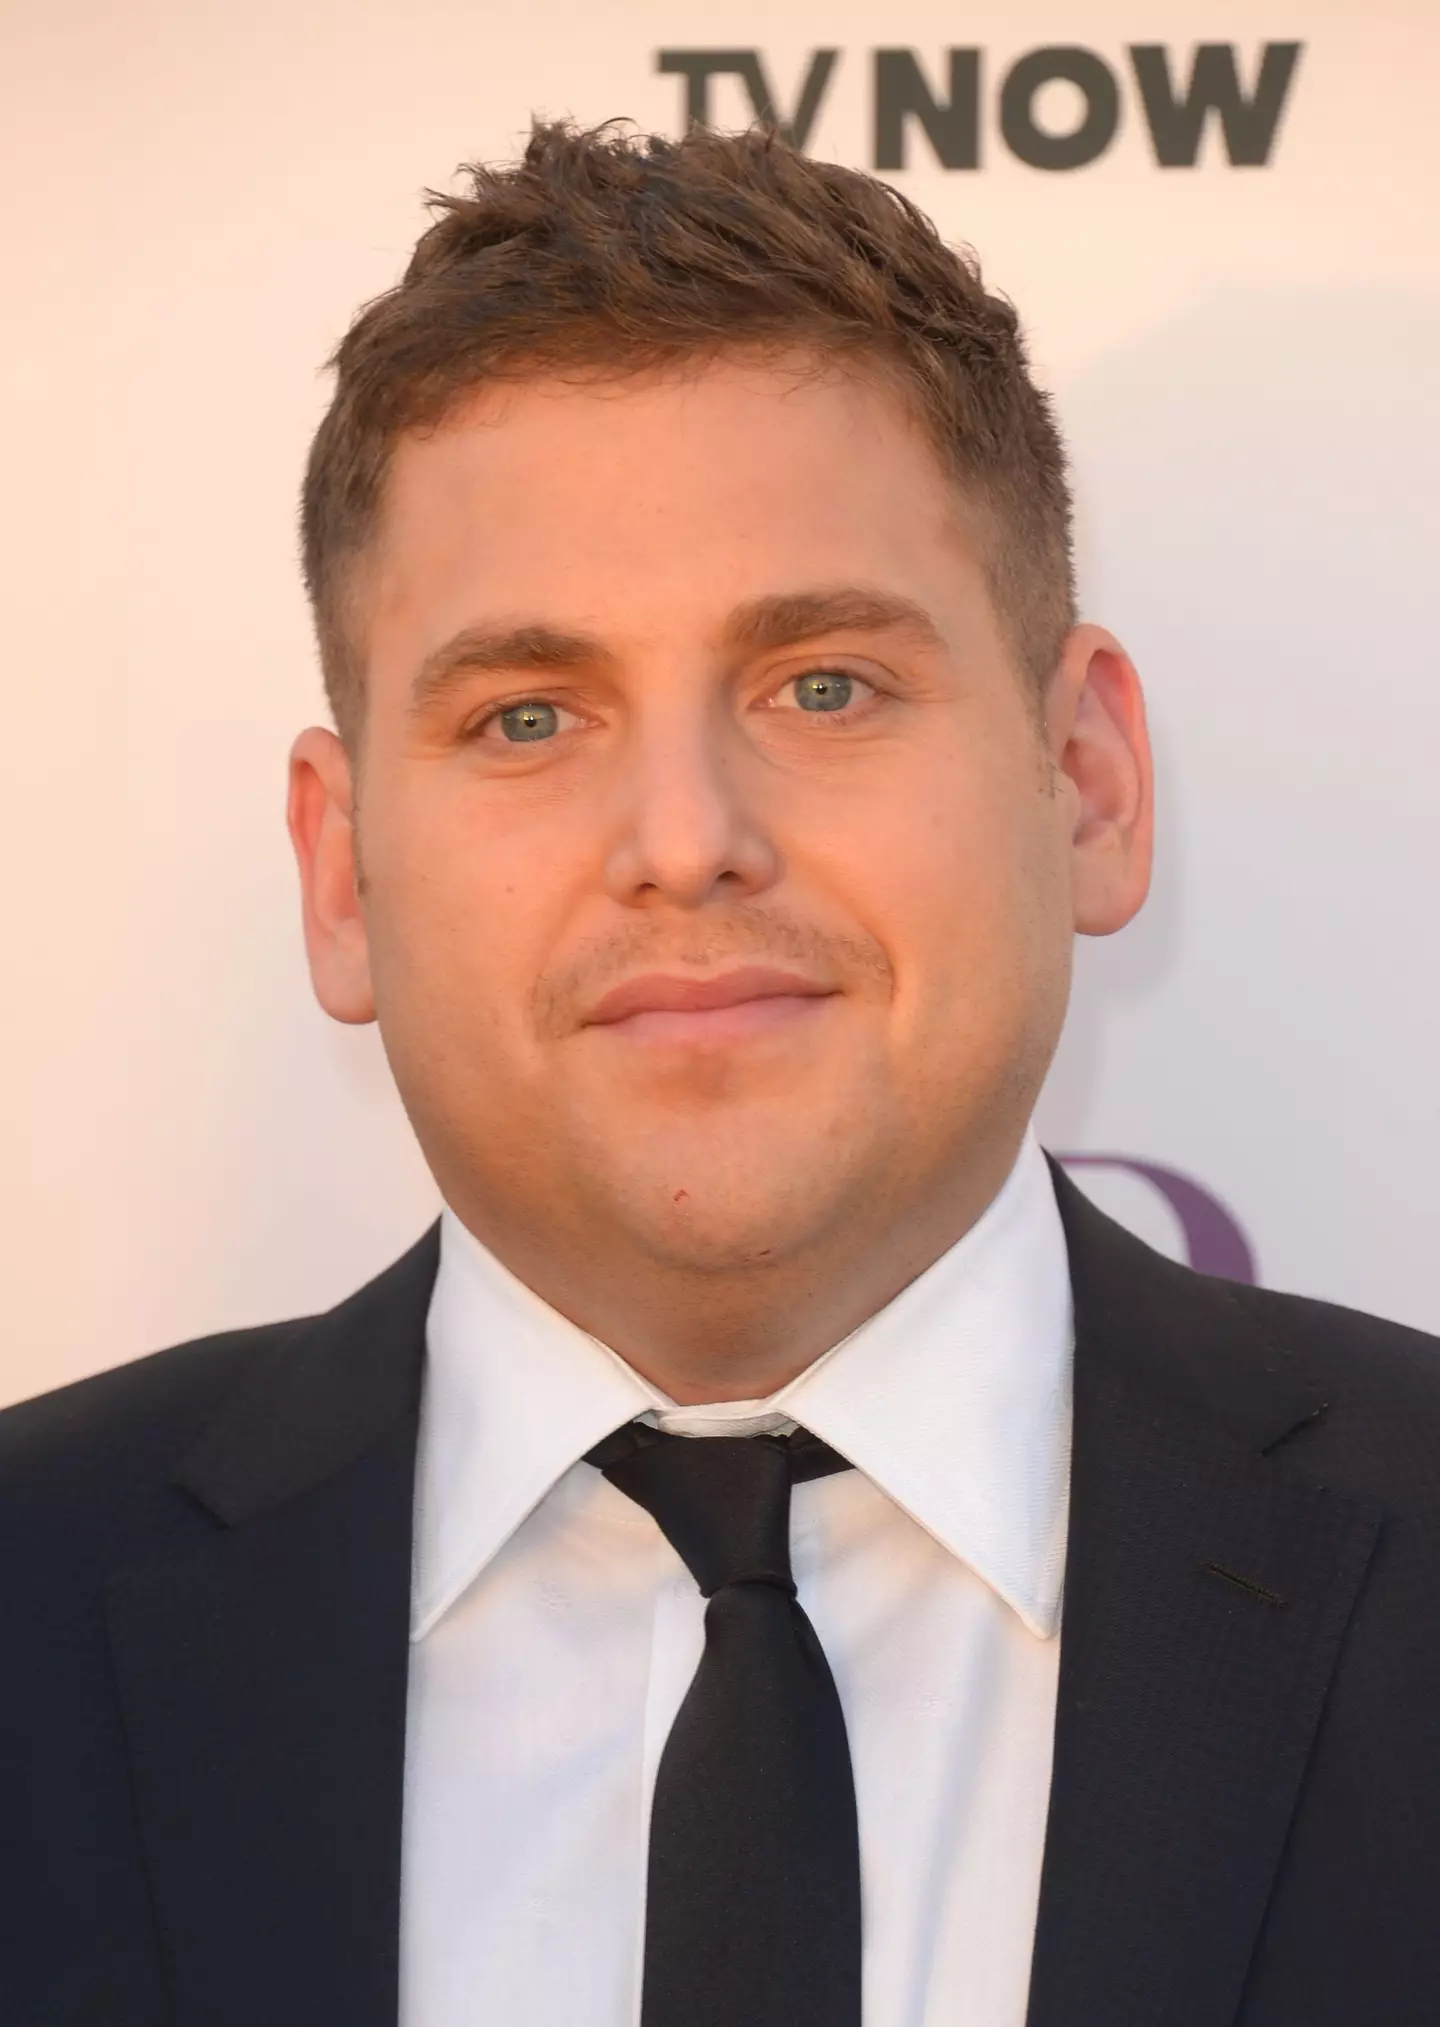 The Superbad star said he won’t be doing any press rounds for upcoming projects.